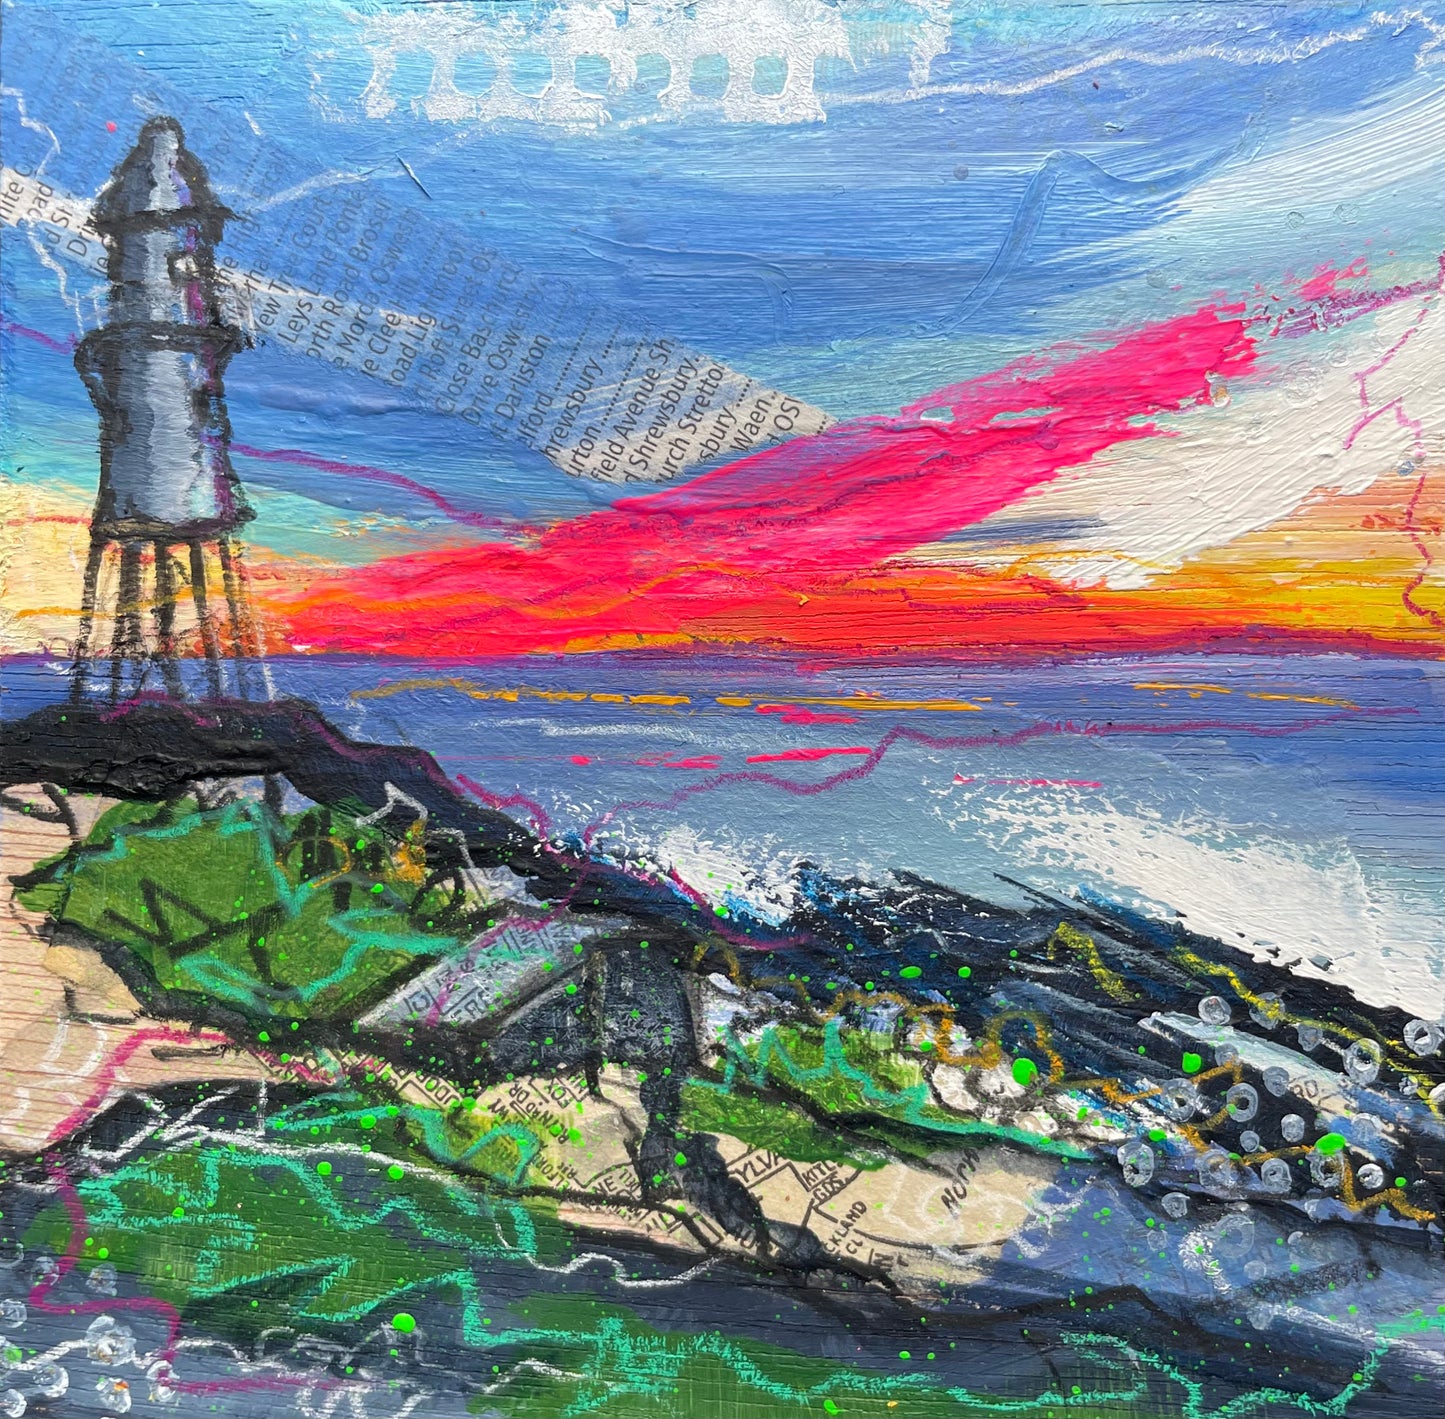 'Black Nore Lighthouse' [Original Painting]